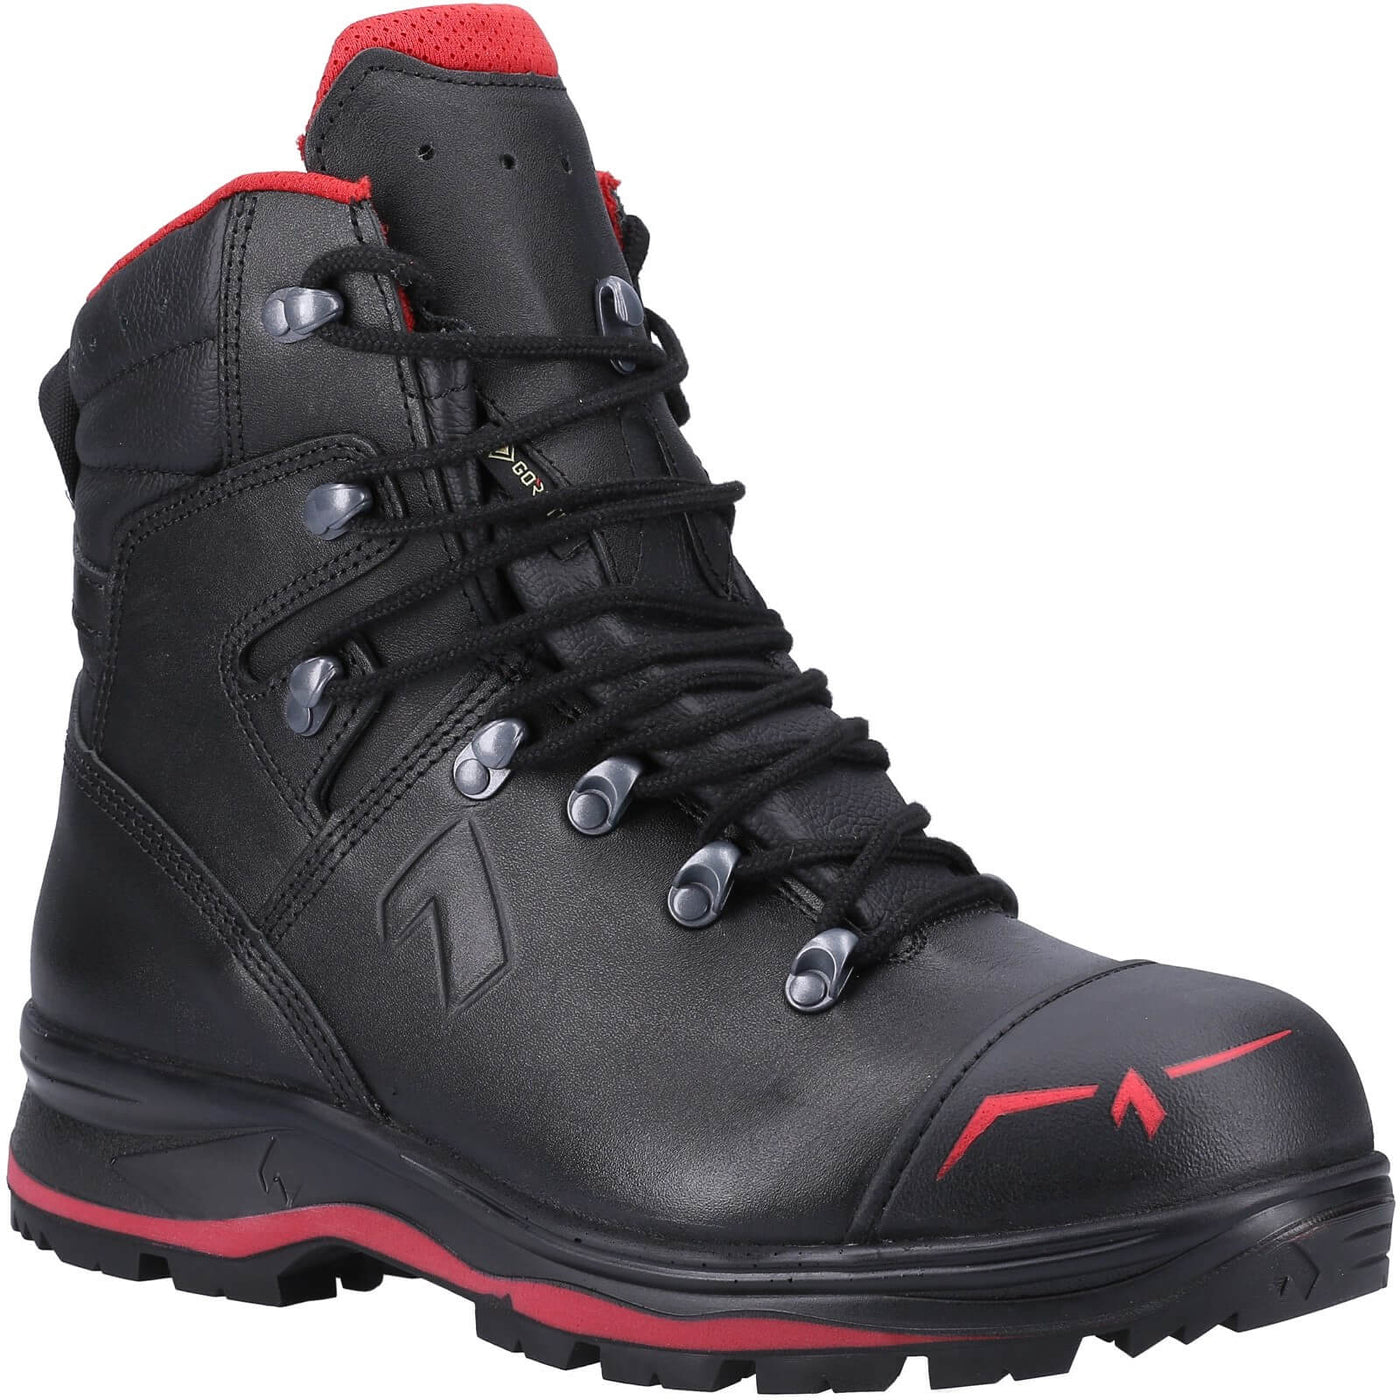 Haix Trekker Pro 2.0 Special Offer Pack - Safety Boots + 3 Pairs Work Socks